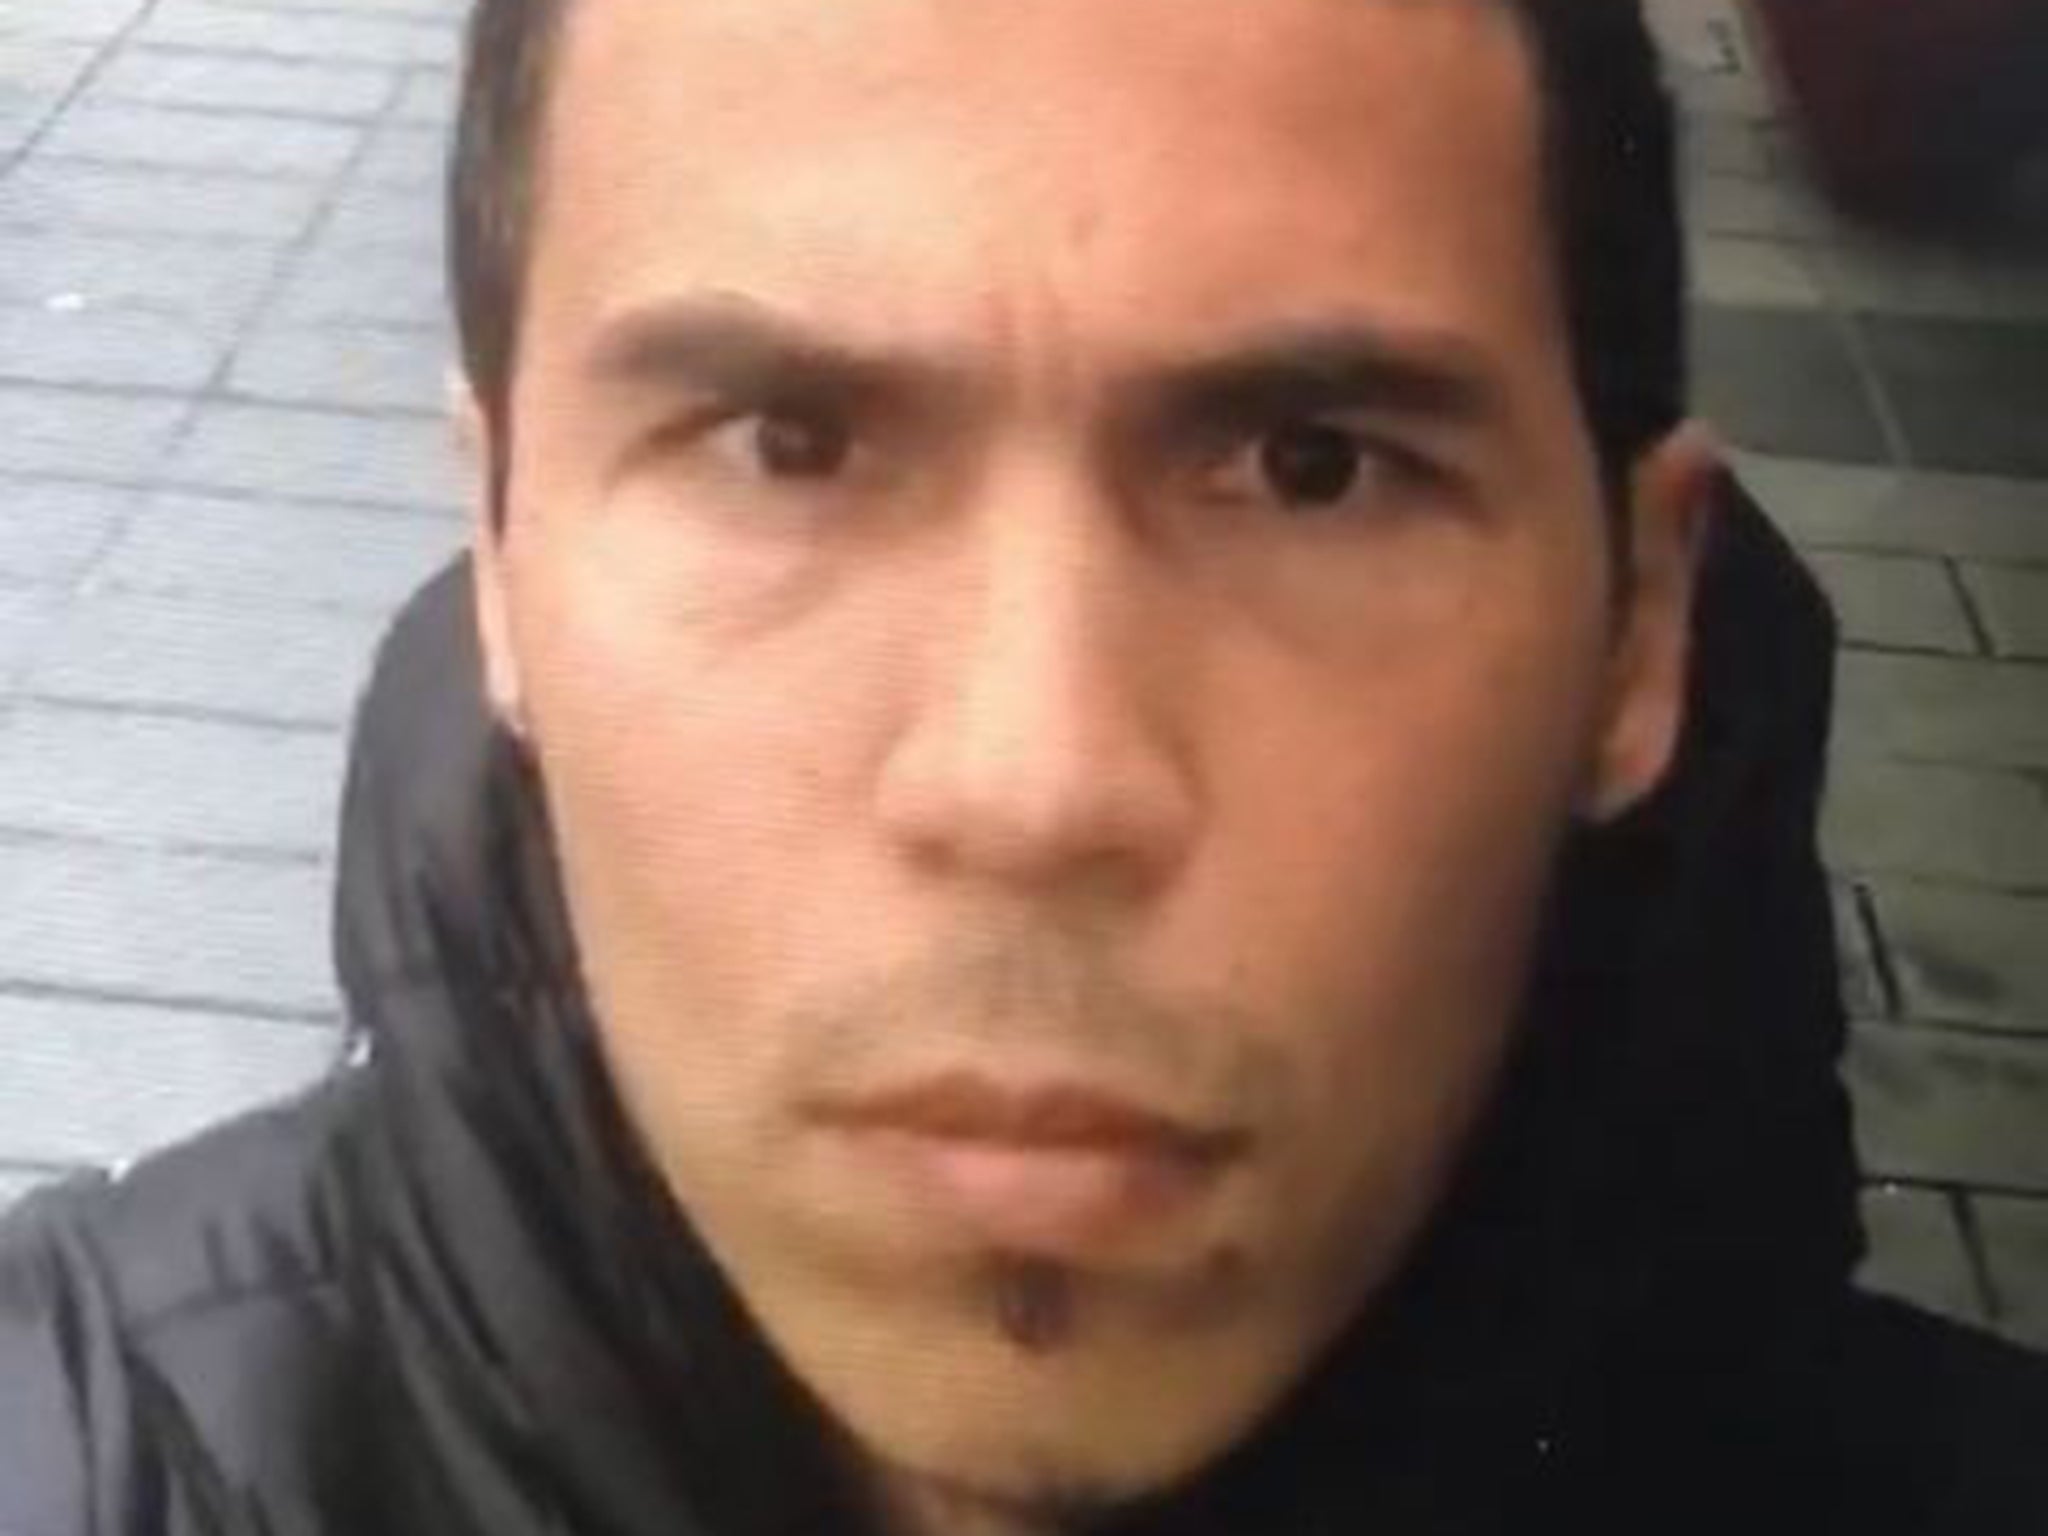 Turkish police have released this picture of the man they believe carried out the New Year nightclub attack